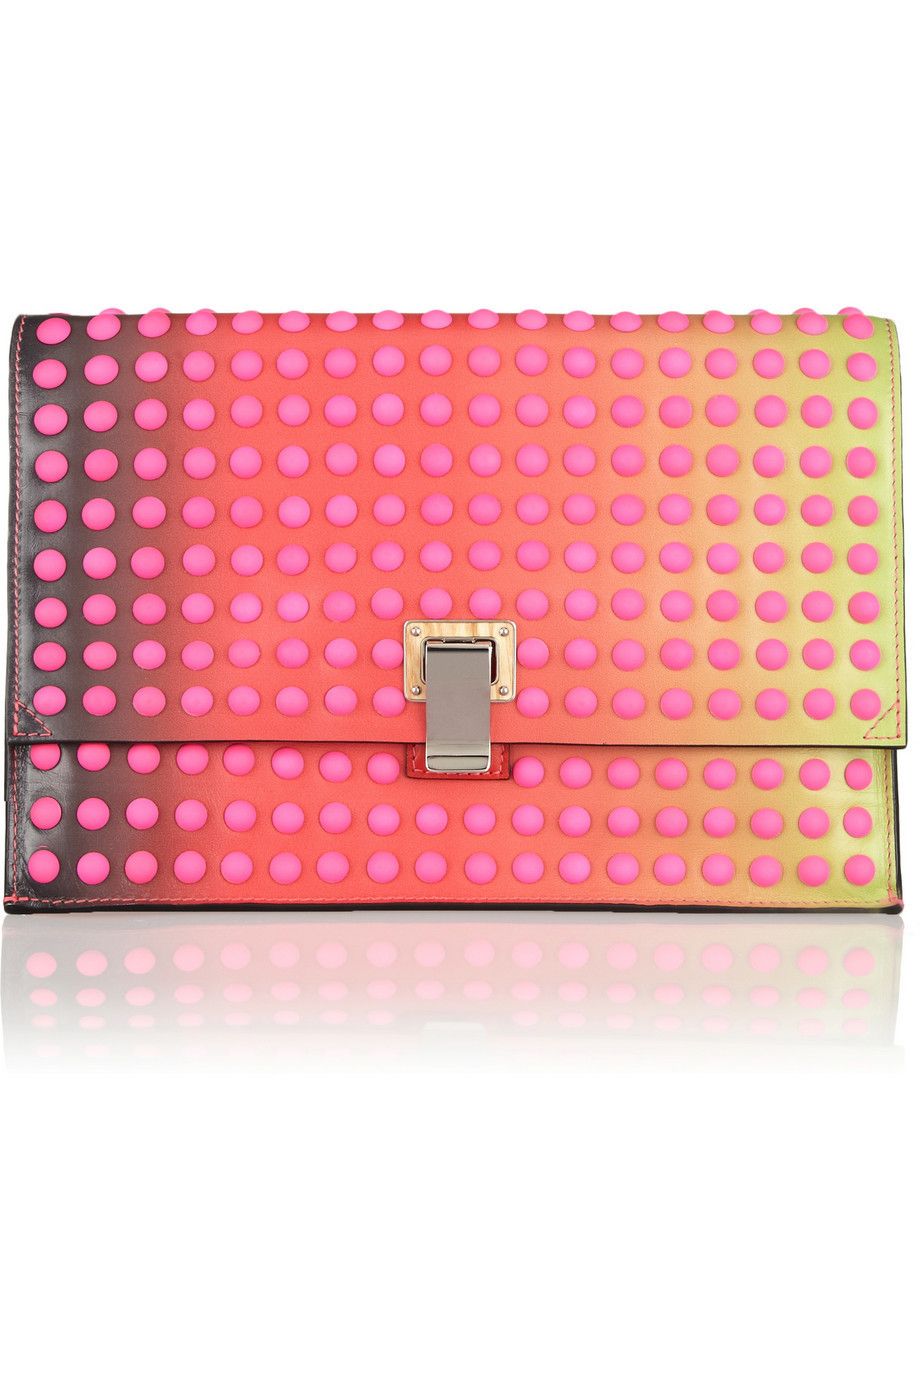 Brown, Pattern, Textile, Electronic device, Red, Technology, Pink, Magenta, Rectangle, Wallet, 